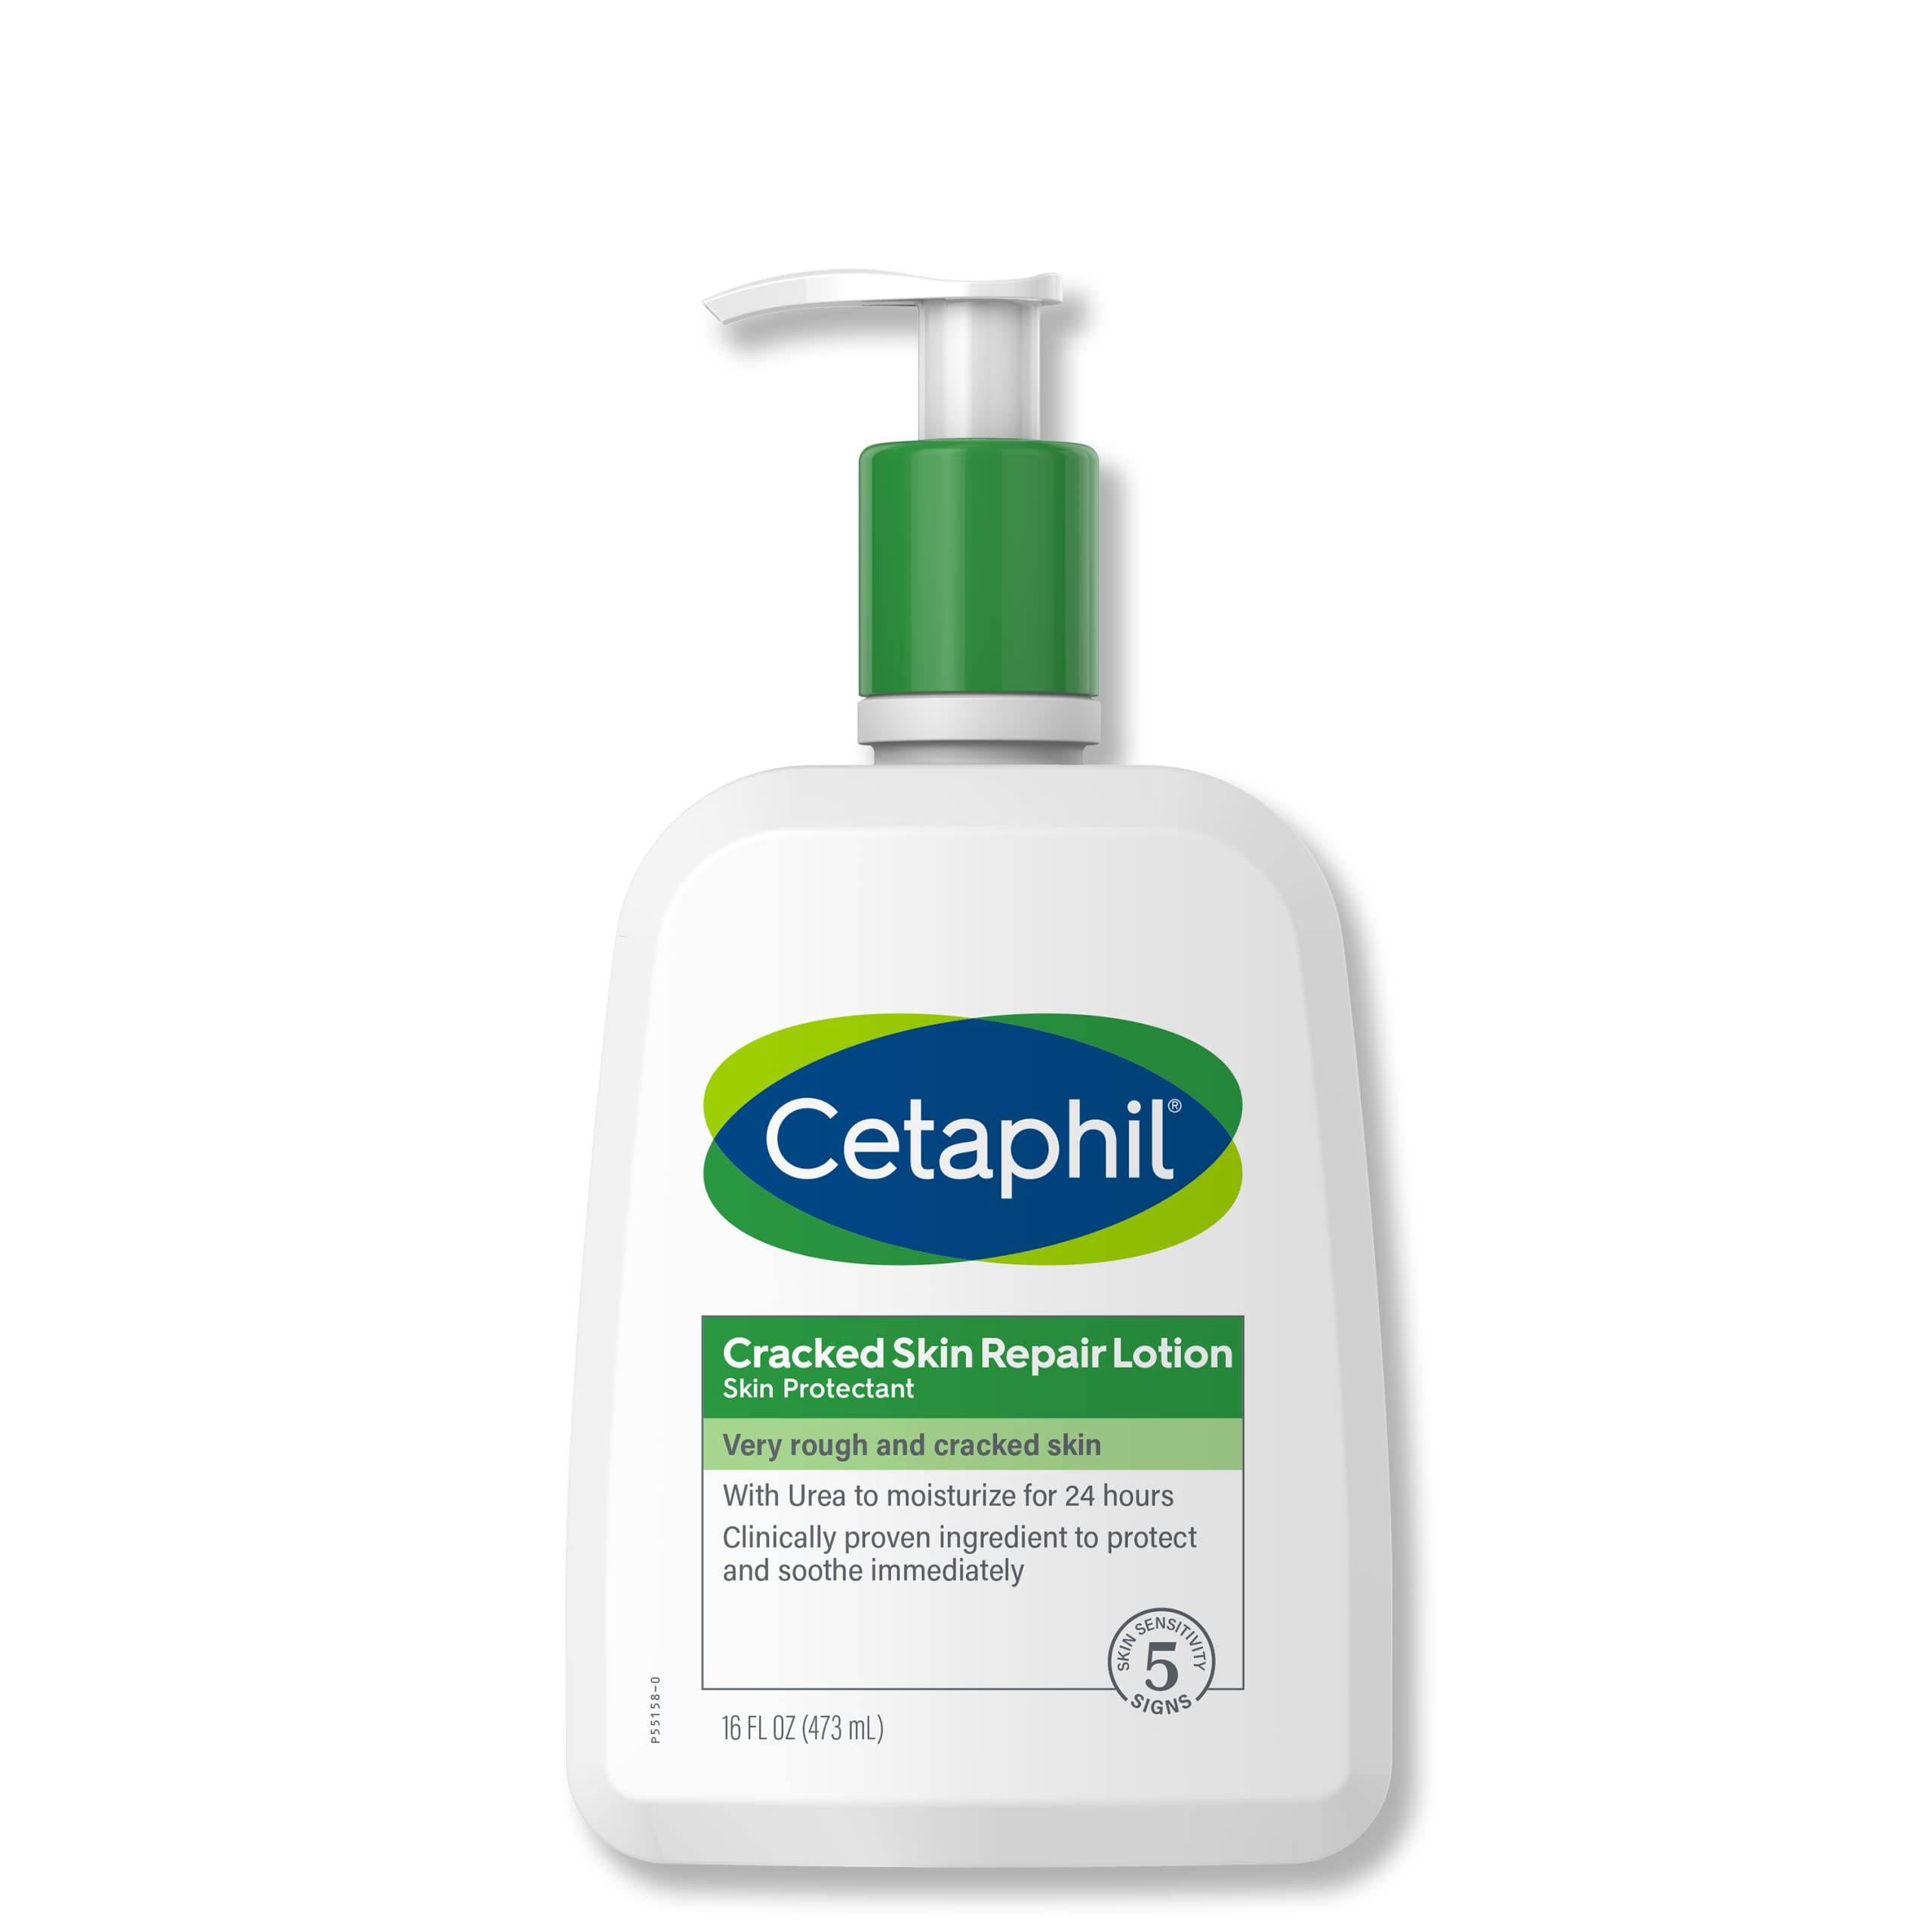 CETAPHIL Cracked Skin Repair Lotion, 16 oz, For Very Rough & Cracked, Sensitive Skin, 24 Hour Hydration, Protects & Hydrates Cracked Skin, Hypoallergenic, Fragrance Free